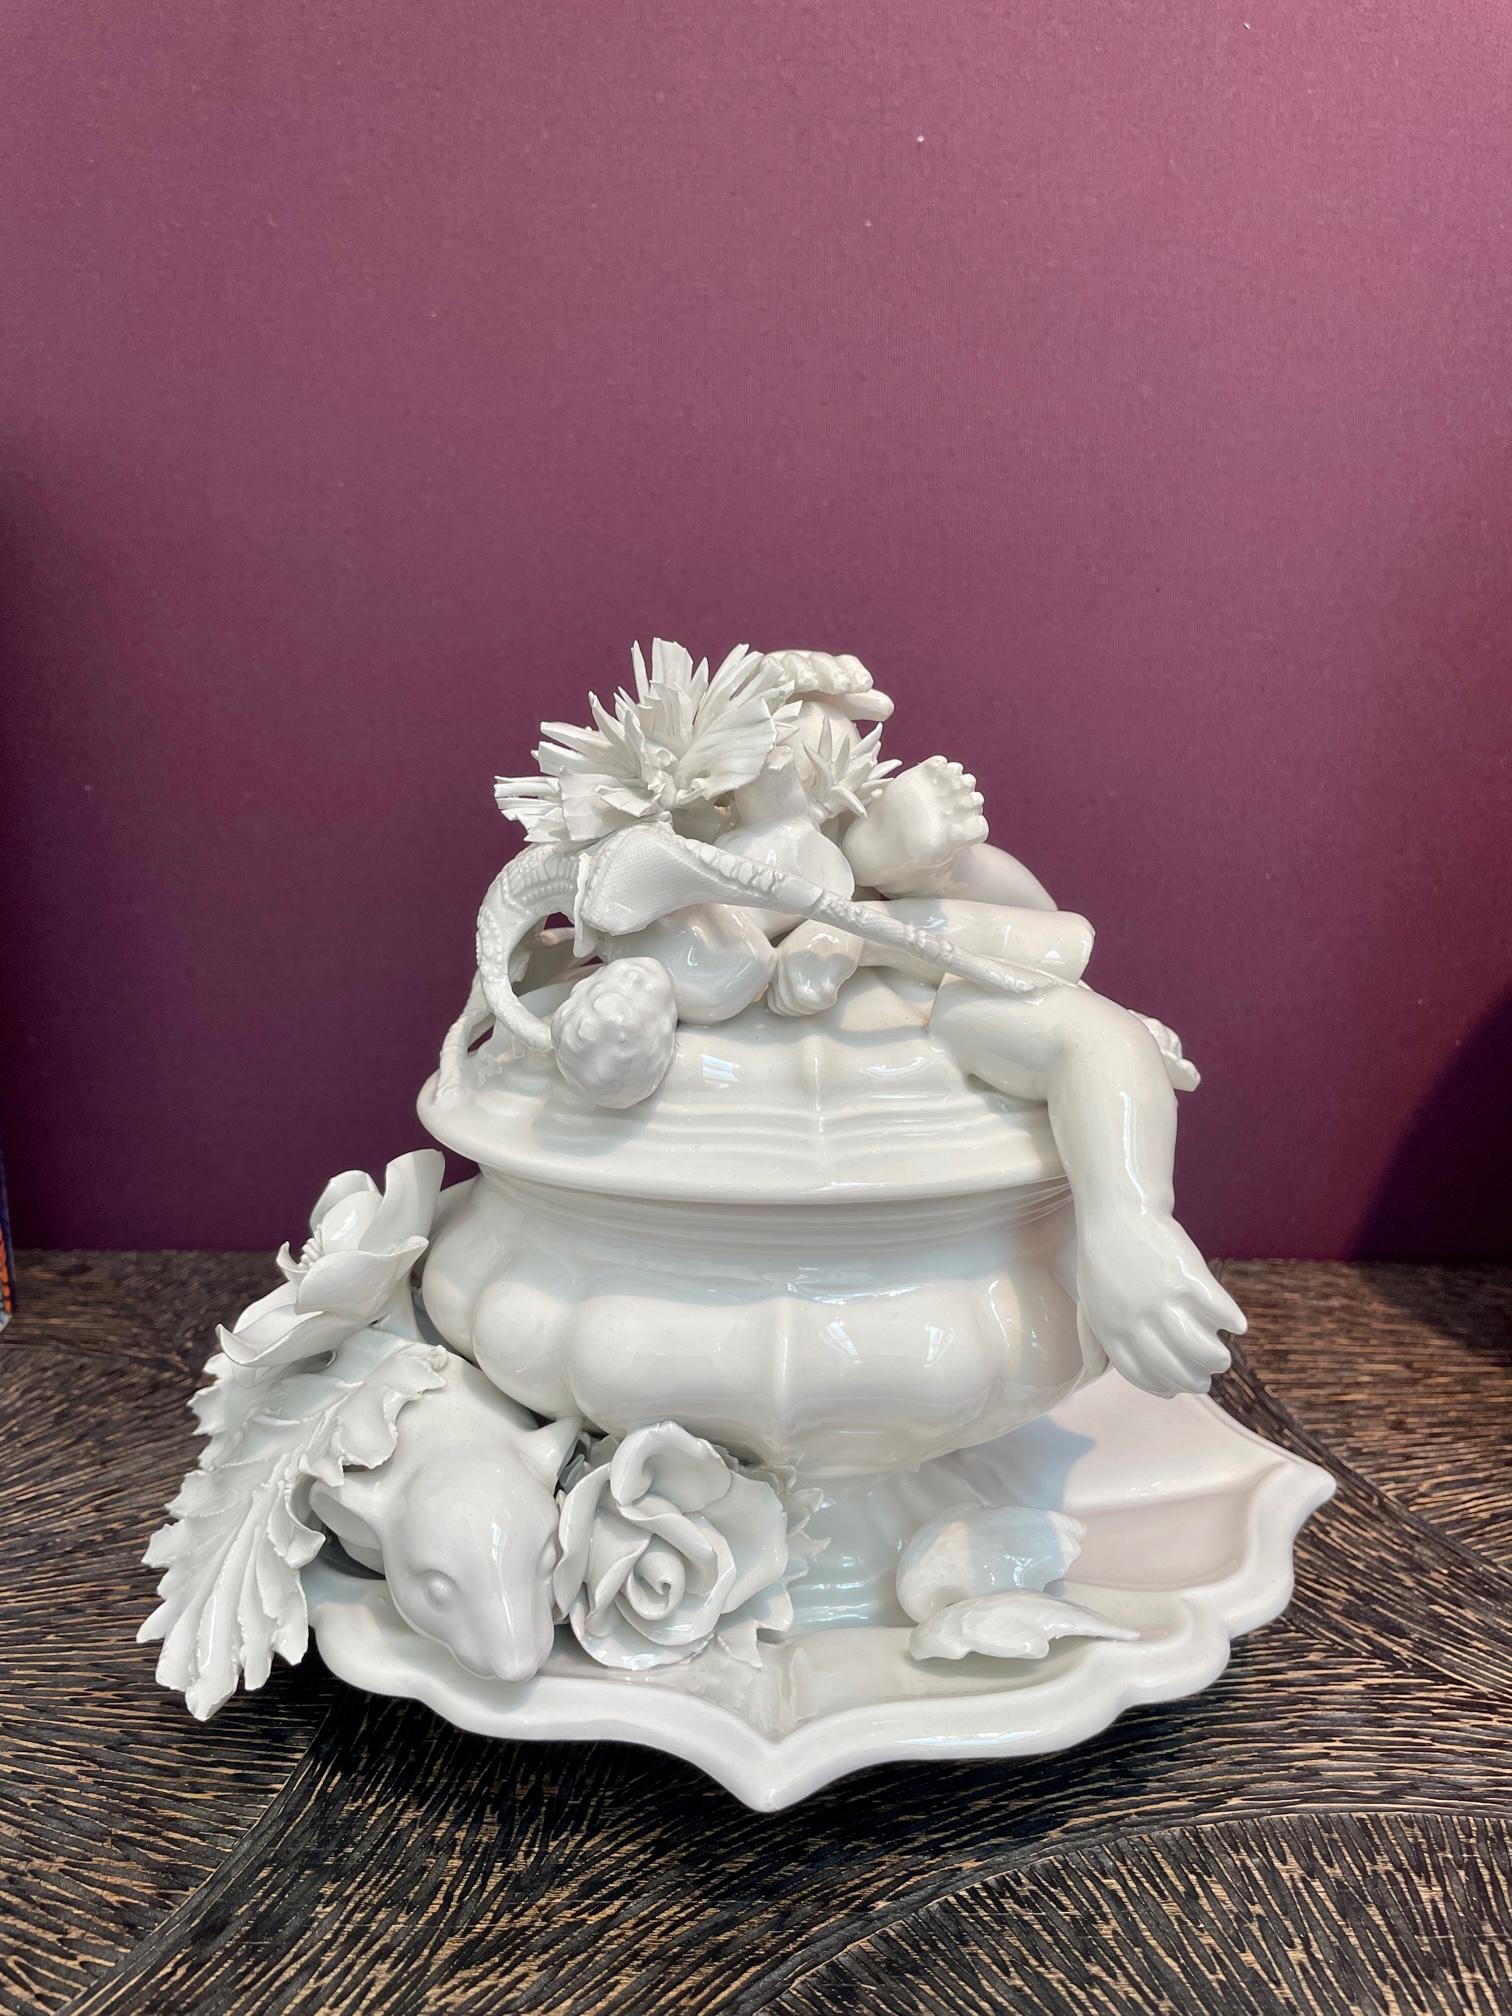 Renzi & Reale, Baroque Rain, 2003, glazed earthenware. Measures: 23 x 23 x 21 cm 

White ceramic sculpture by renowned designer-makers duo Renzi & Reale who operated in a successful collaboration from the early nineties till the early 2000s. There